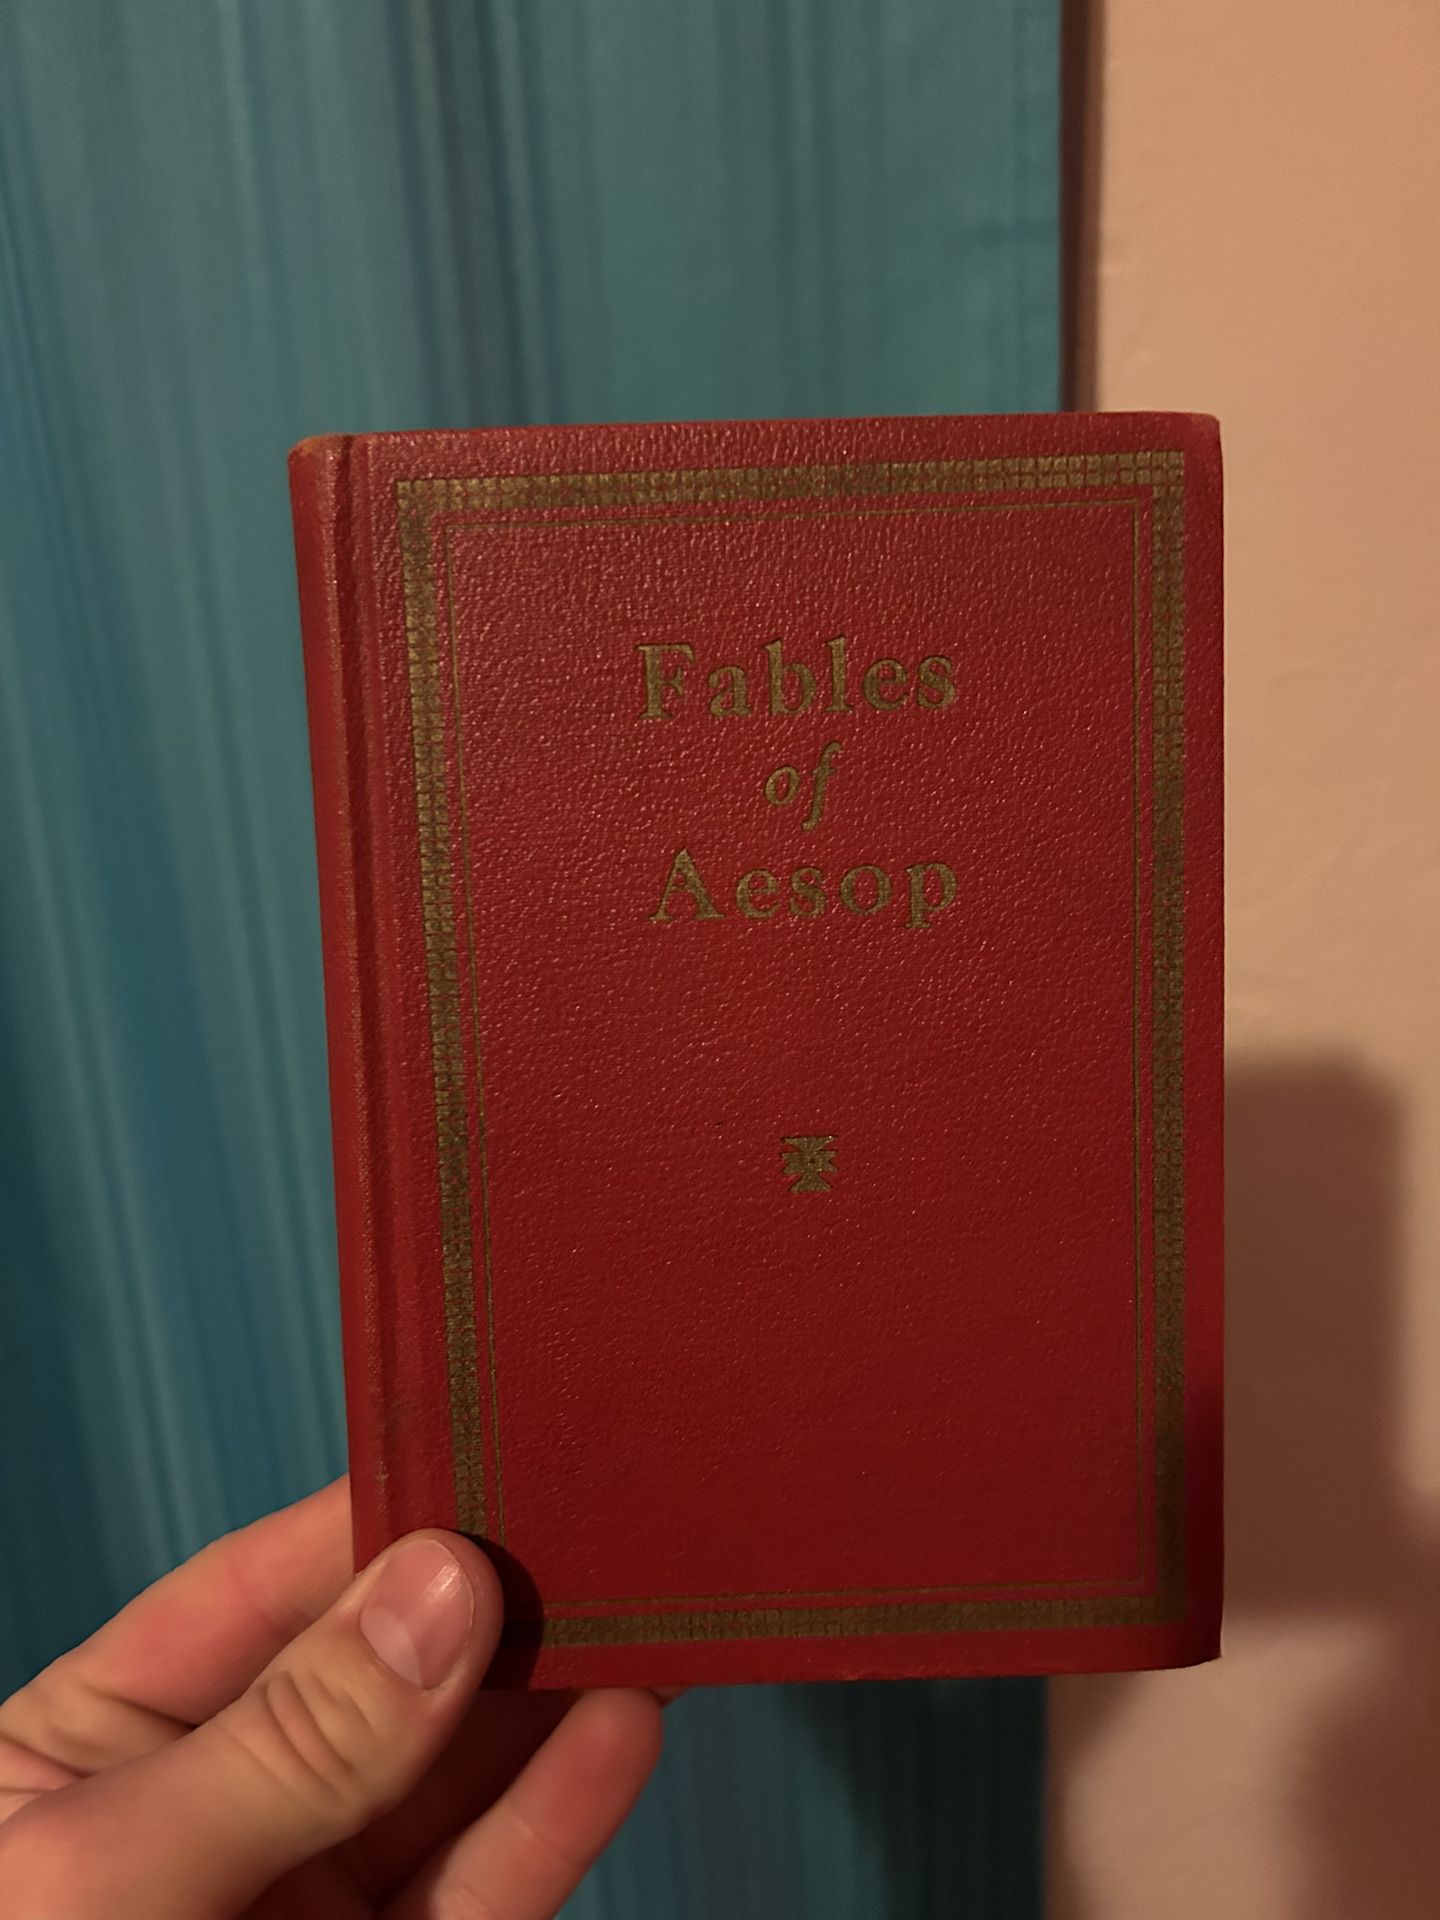 Fables Of Aesop